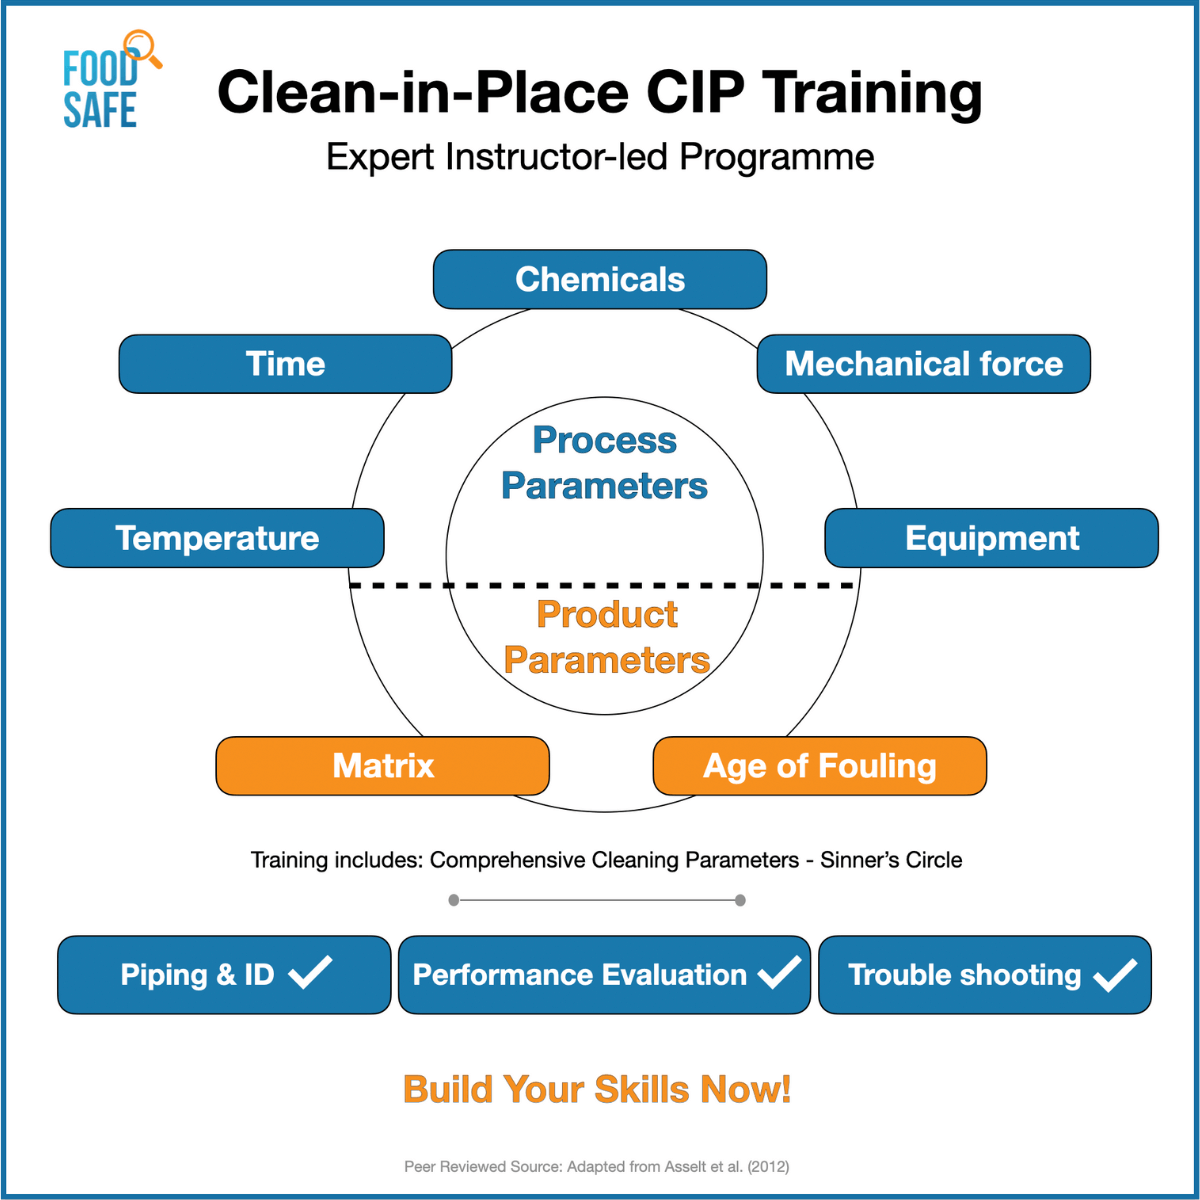 Clean-in-Place CIP Training - Sinners Circle Cleaning Parameters